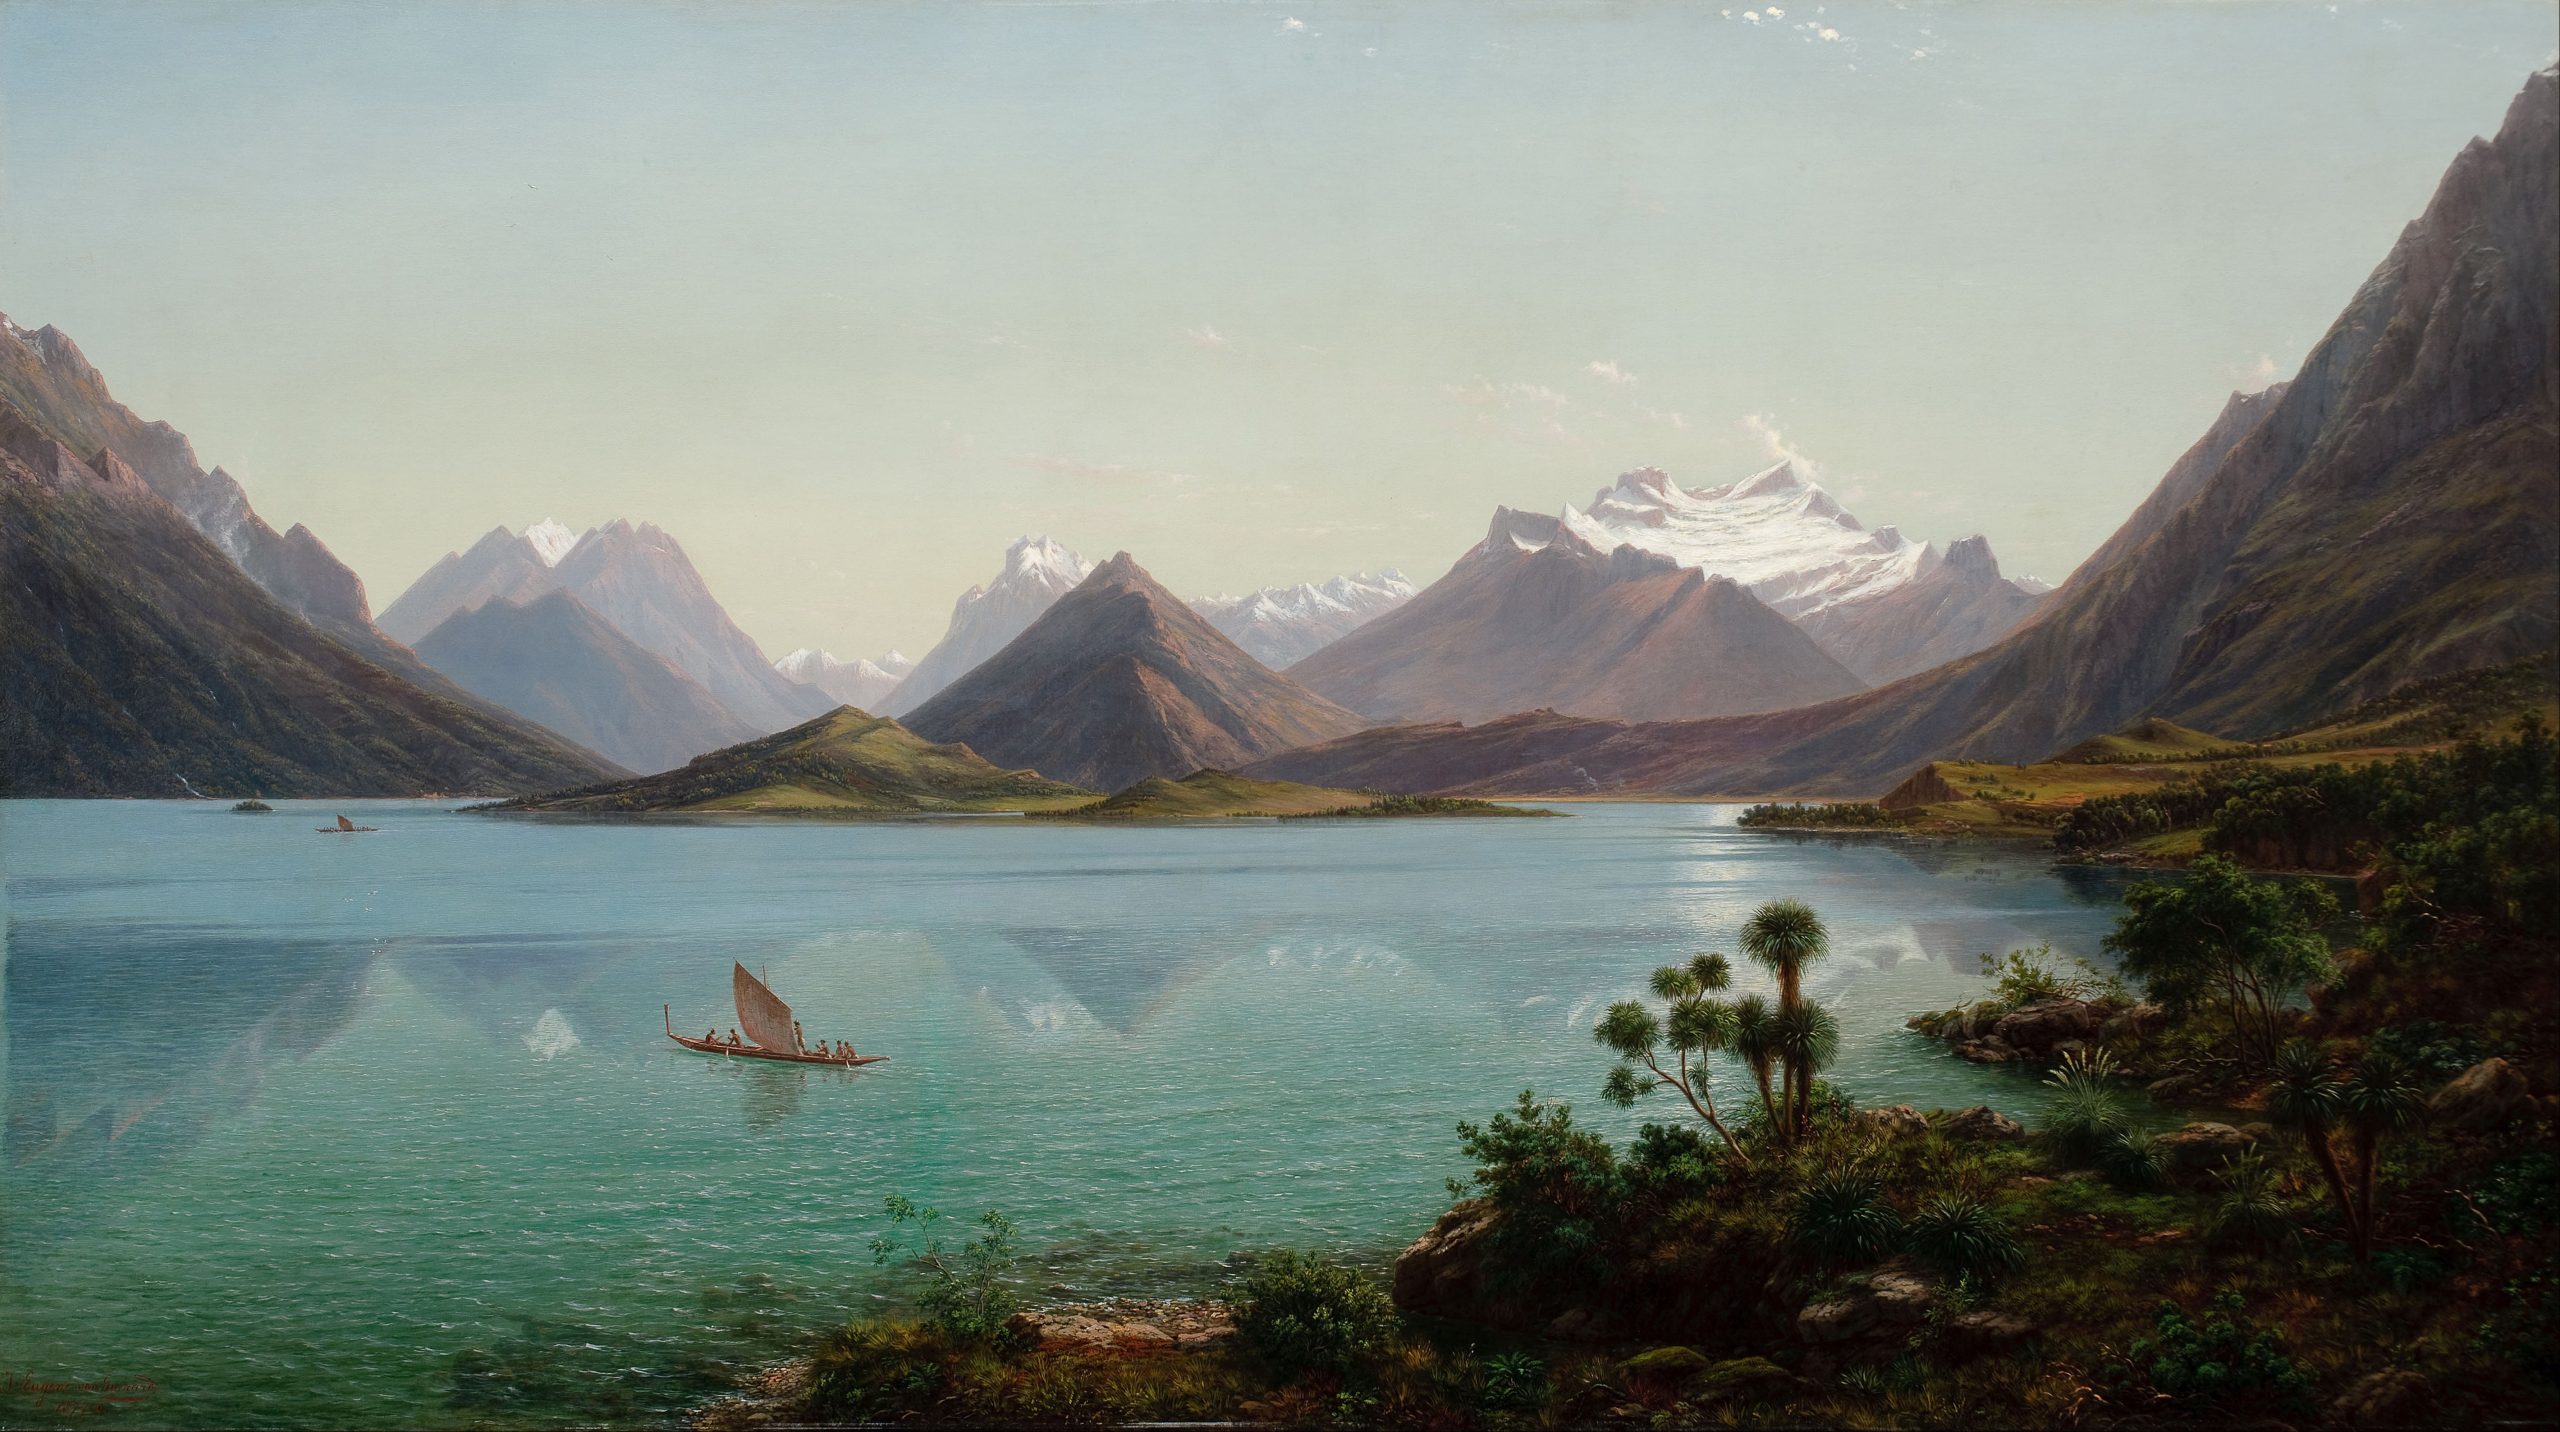 A landscape view of a calm lake with snowy mountains in the background